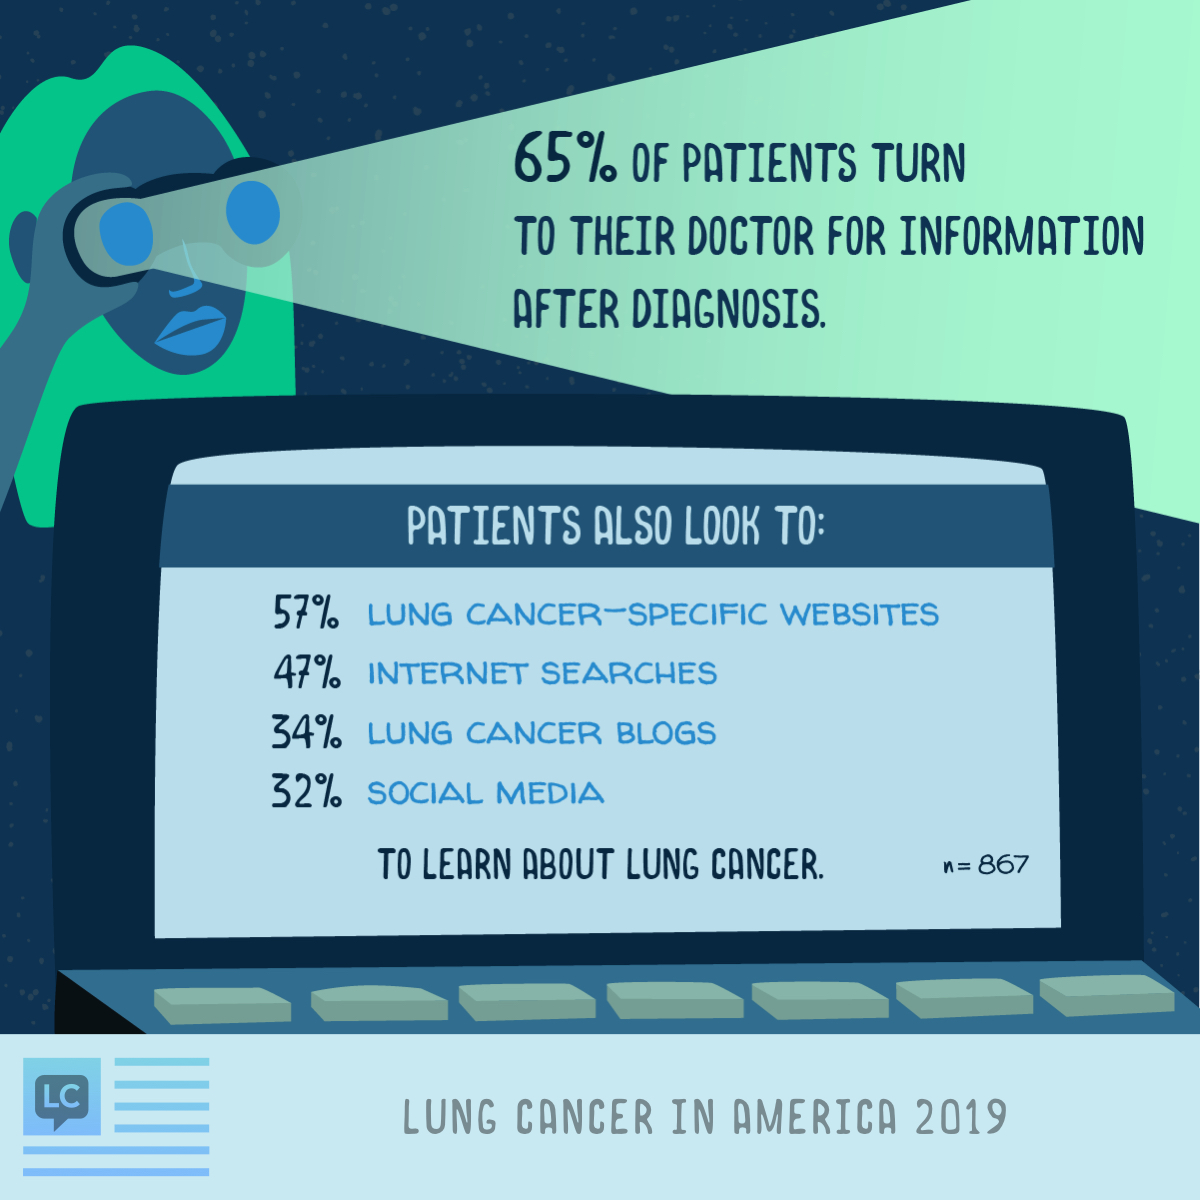 65% of patients turn to their doctor after diagnosis while others use websites (57%), internet searches (47%), blogs (34%), or social media (32%).